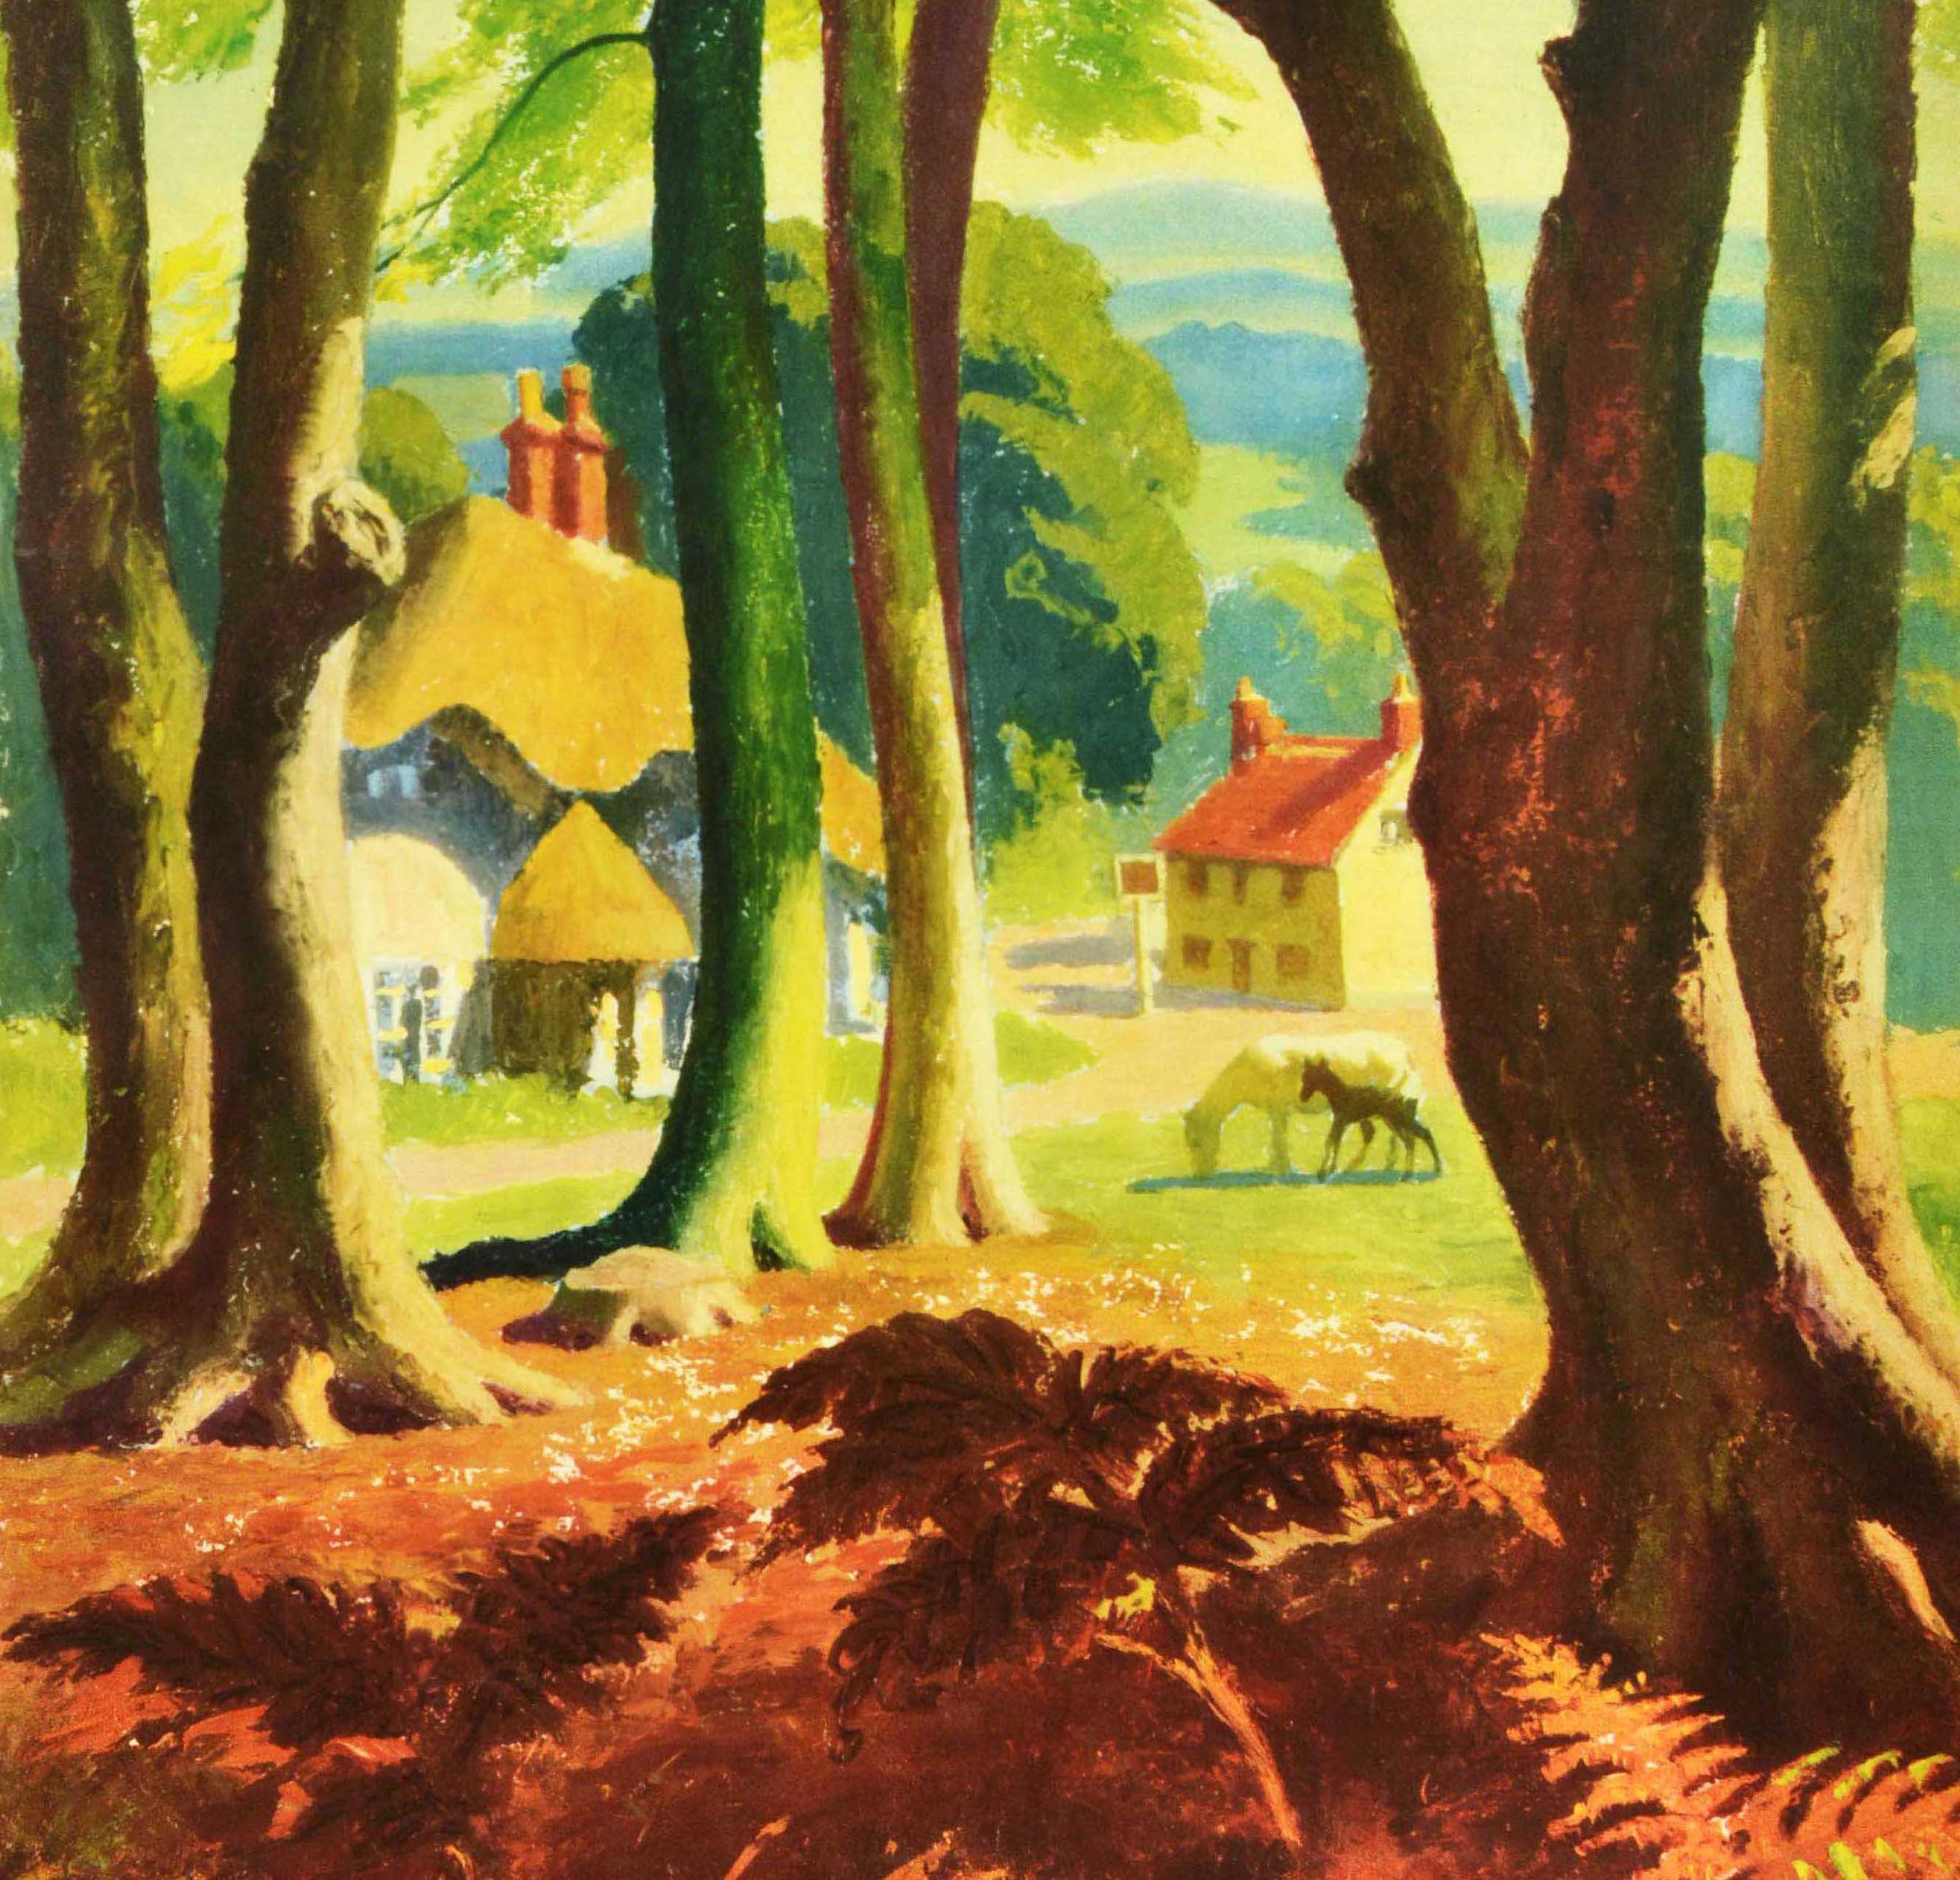 Original vintage travel poster for Hampshire served by British Railways featuring a scenic illustration by the English artist Alan Durman (1905-1963) depicting a view through trees and leaves to New Forest ponies grazing on the grass in the sunshine